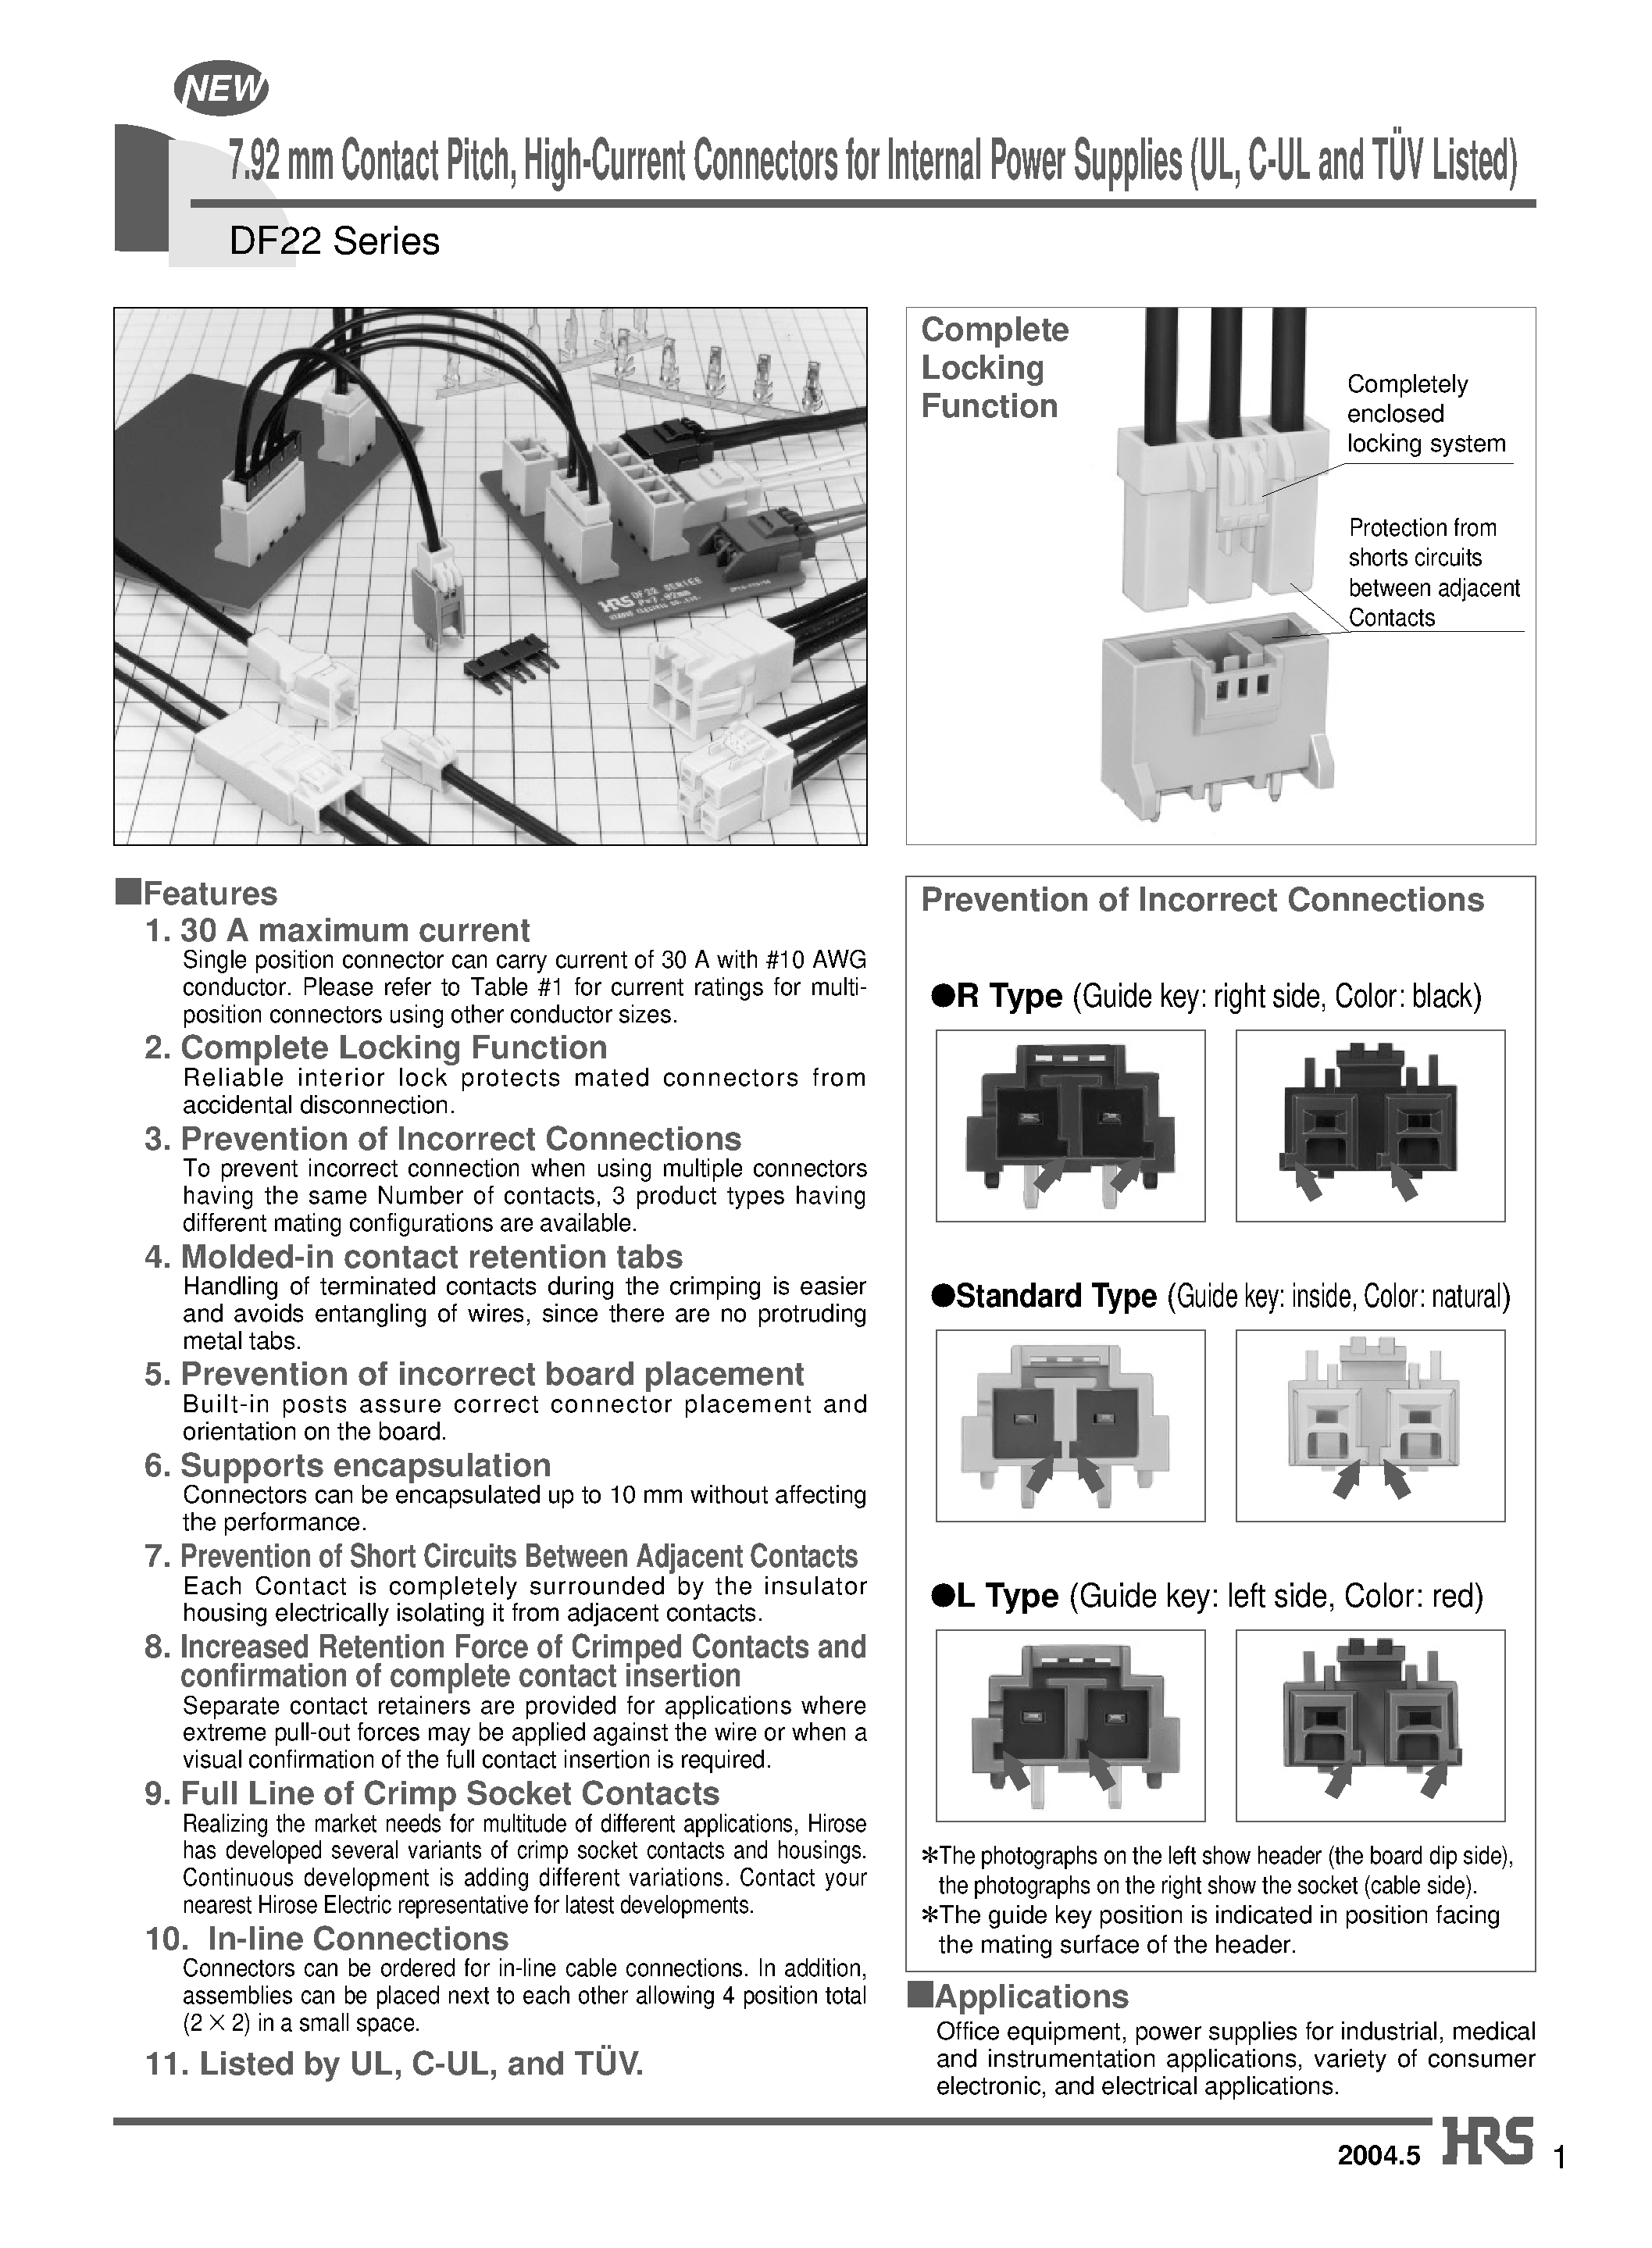 Datasheet DF22-2P-7.92DSA - 7.92 mm Contact Pitch/ High-Current Connectors for Internal Power Supplies (UL/ C-UL and TUV Listed) page 1